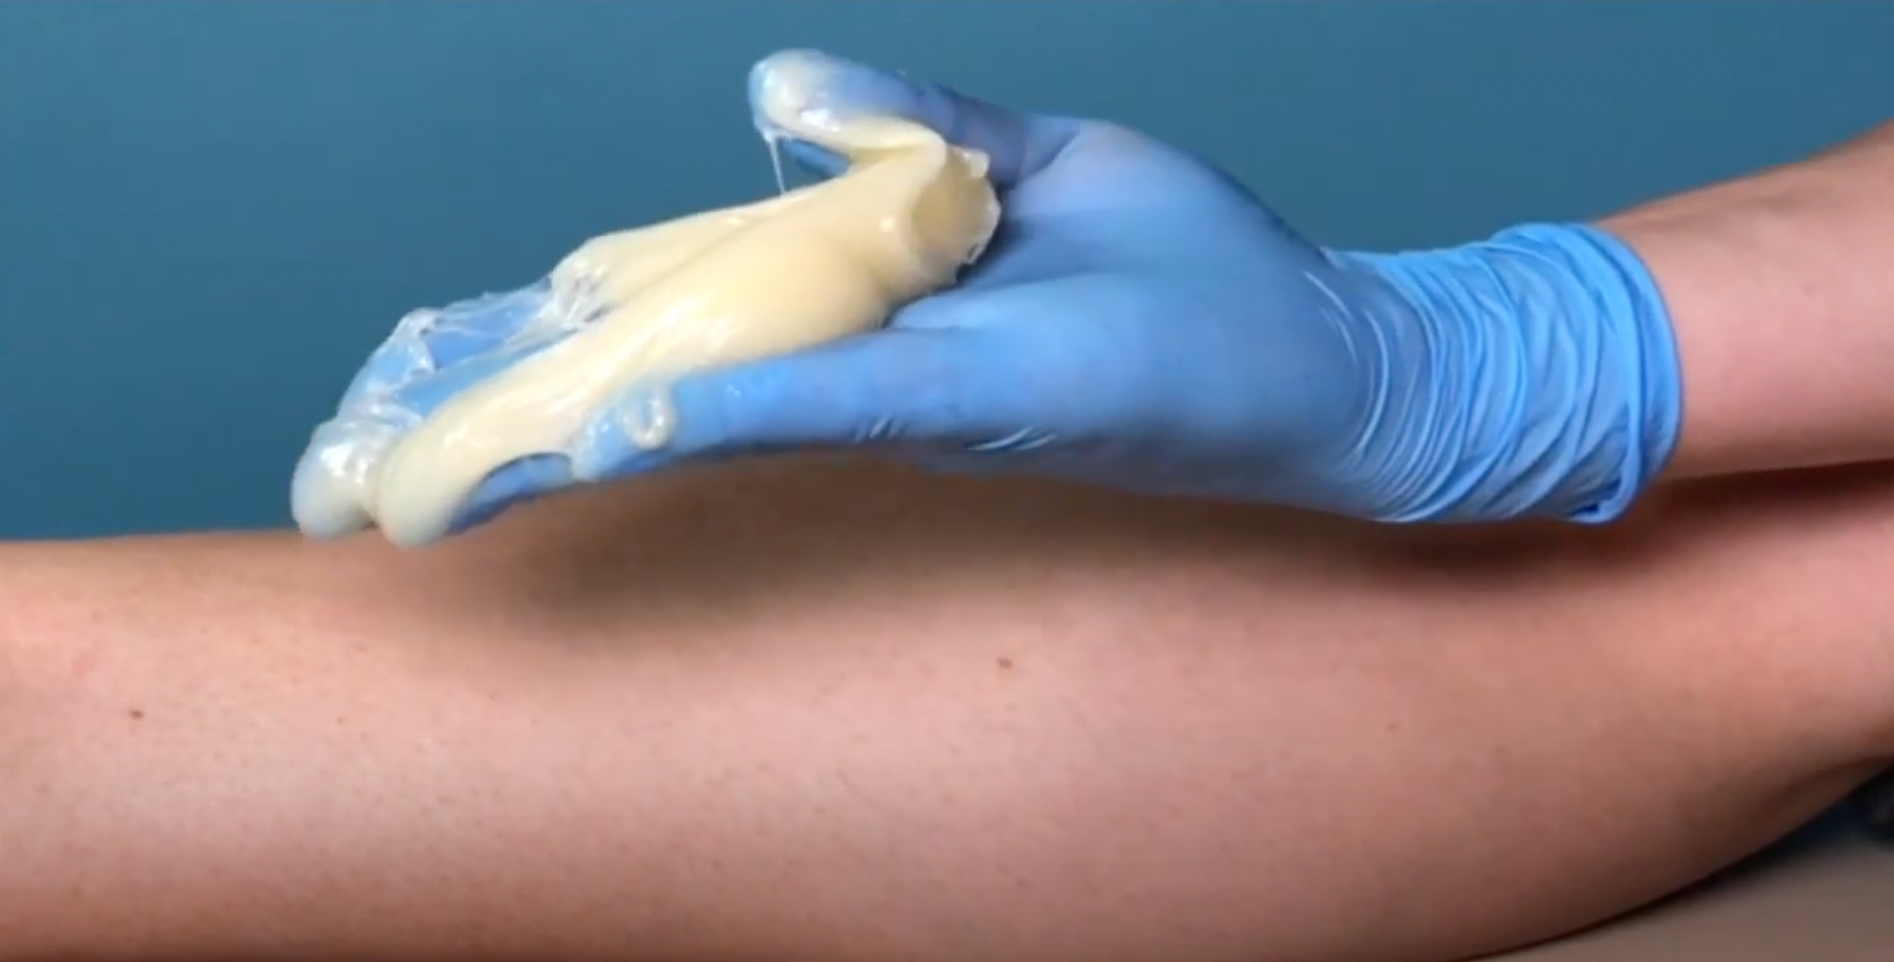 Watch a video about how to properly hold and handle sugar paste